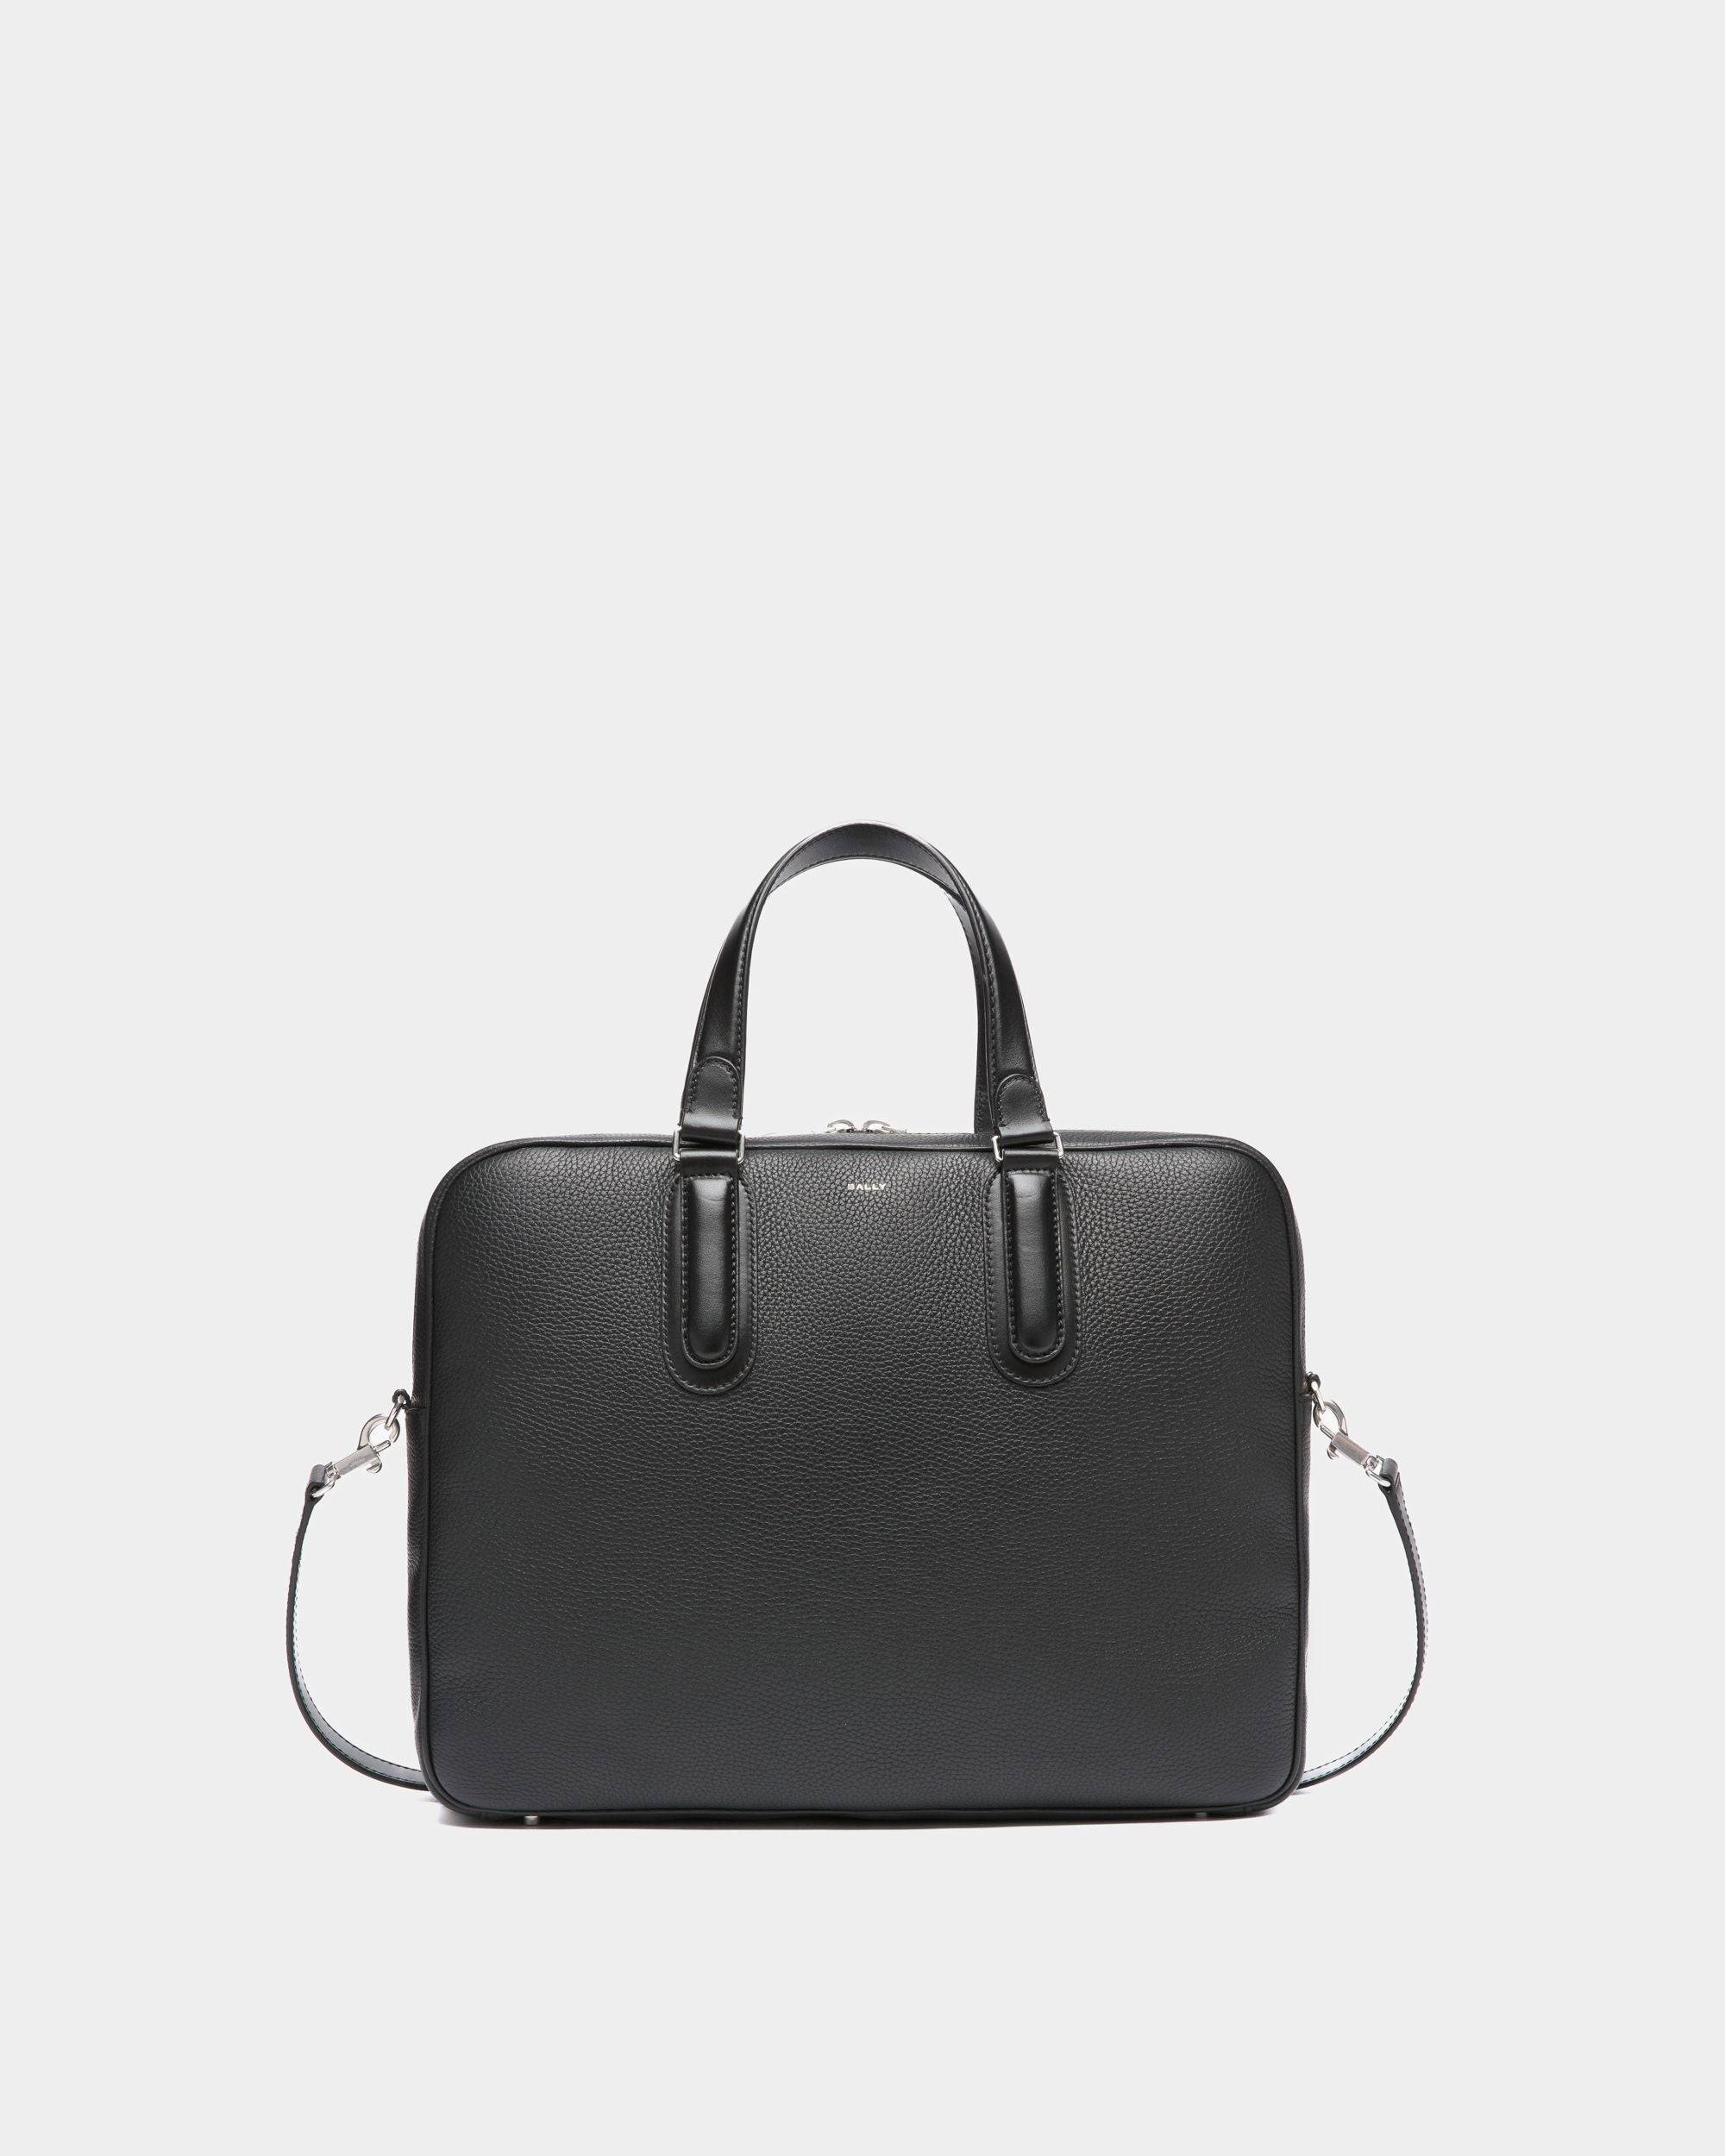 Men's Spin Briefcase In Black Grained Leather | Bally | Still Life Front